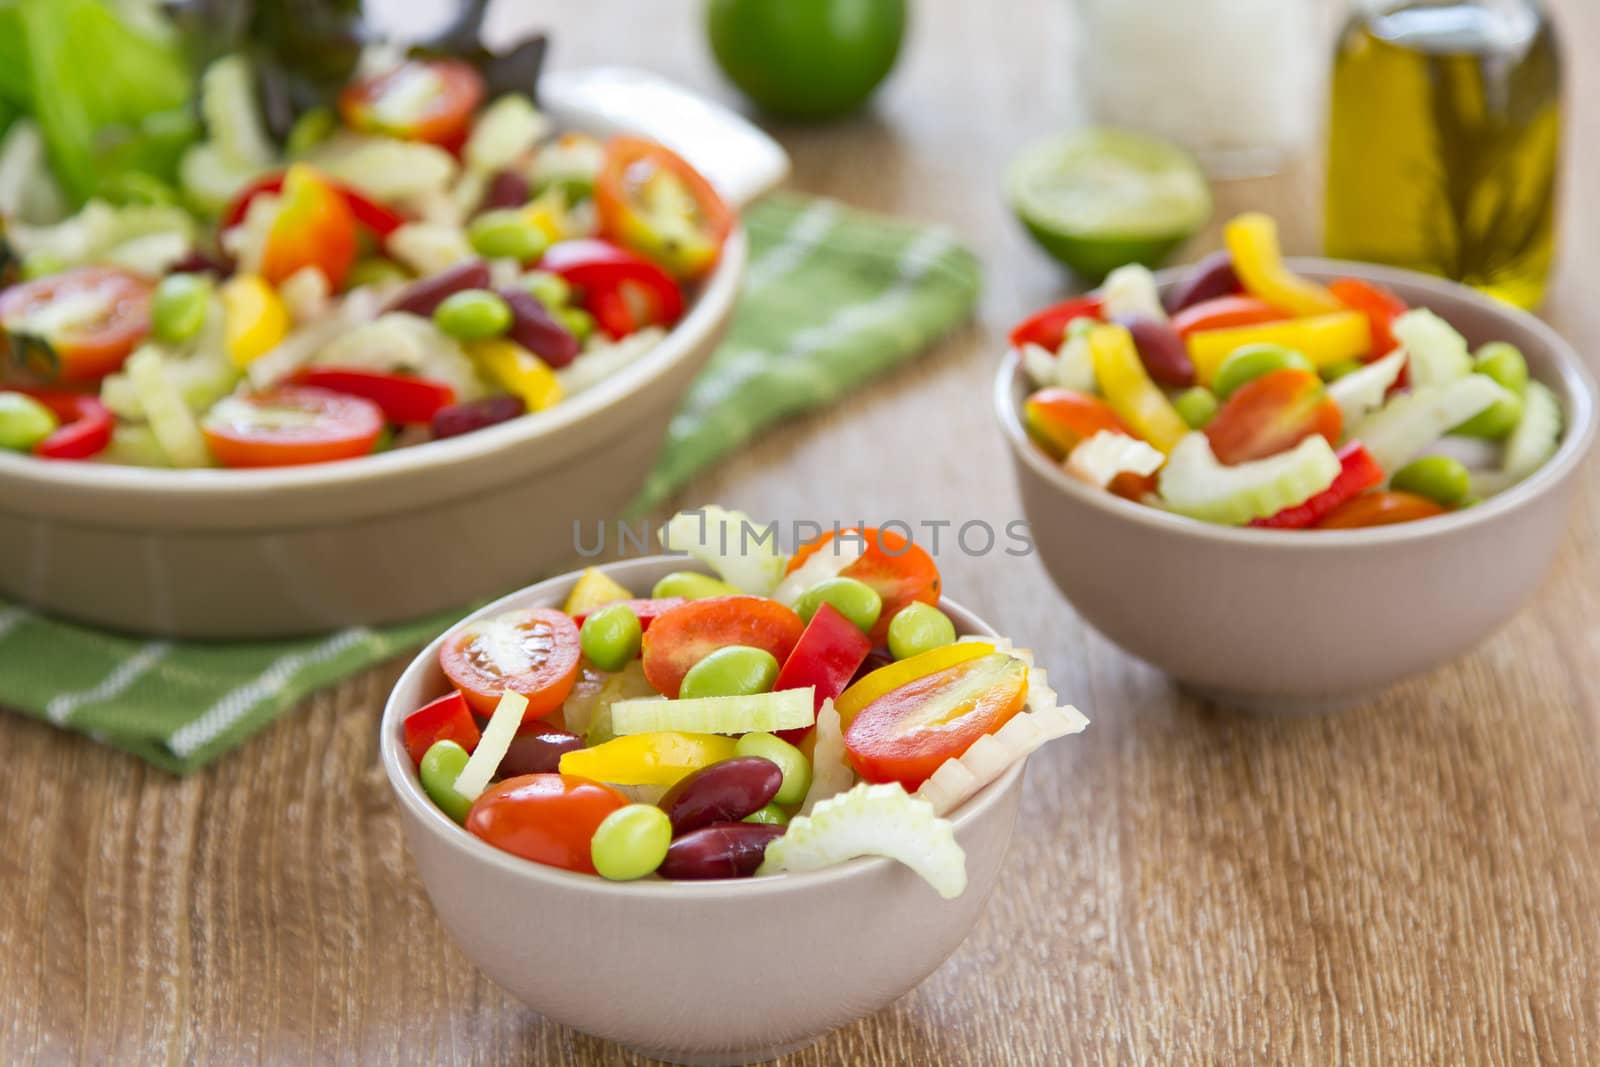 Celery with kidney bean and pepper salad by vanillaechoes